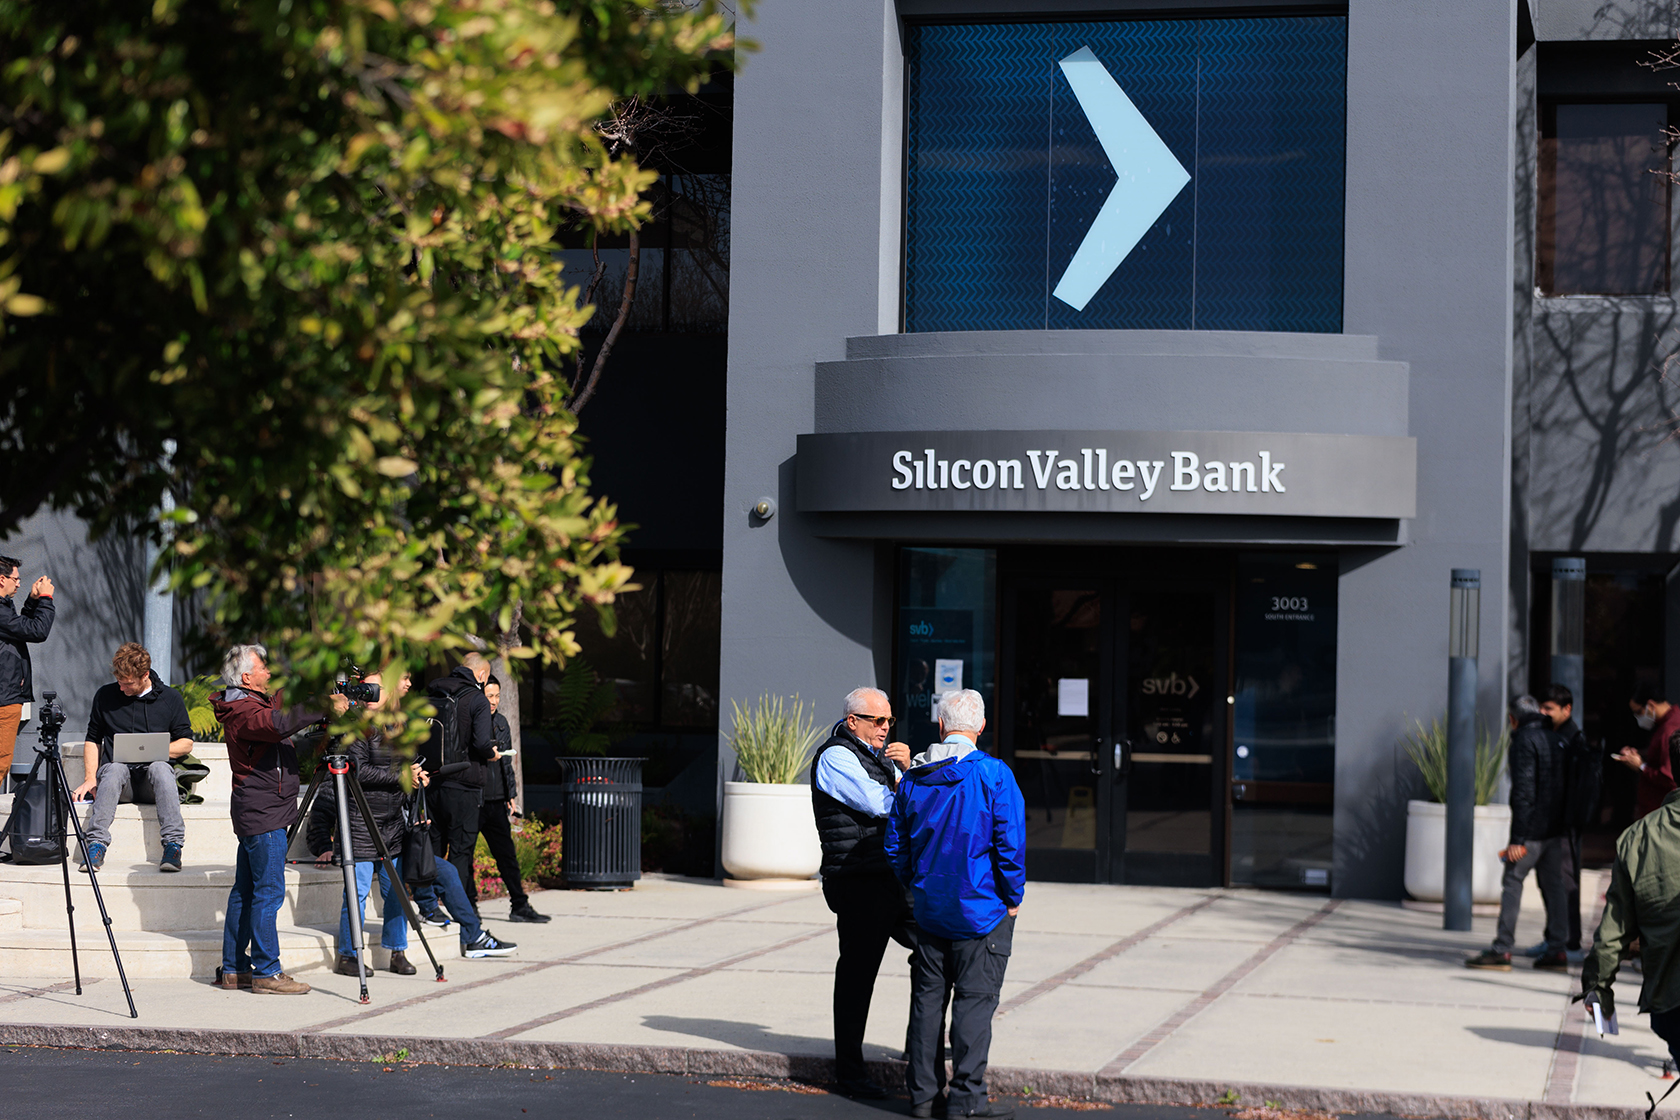 People outside Silicon Valley Bank building